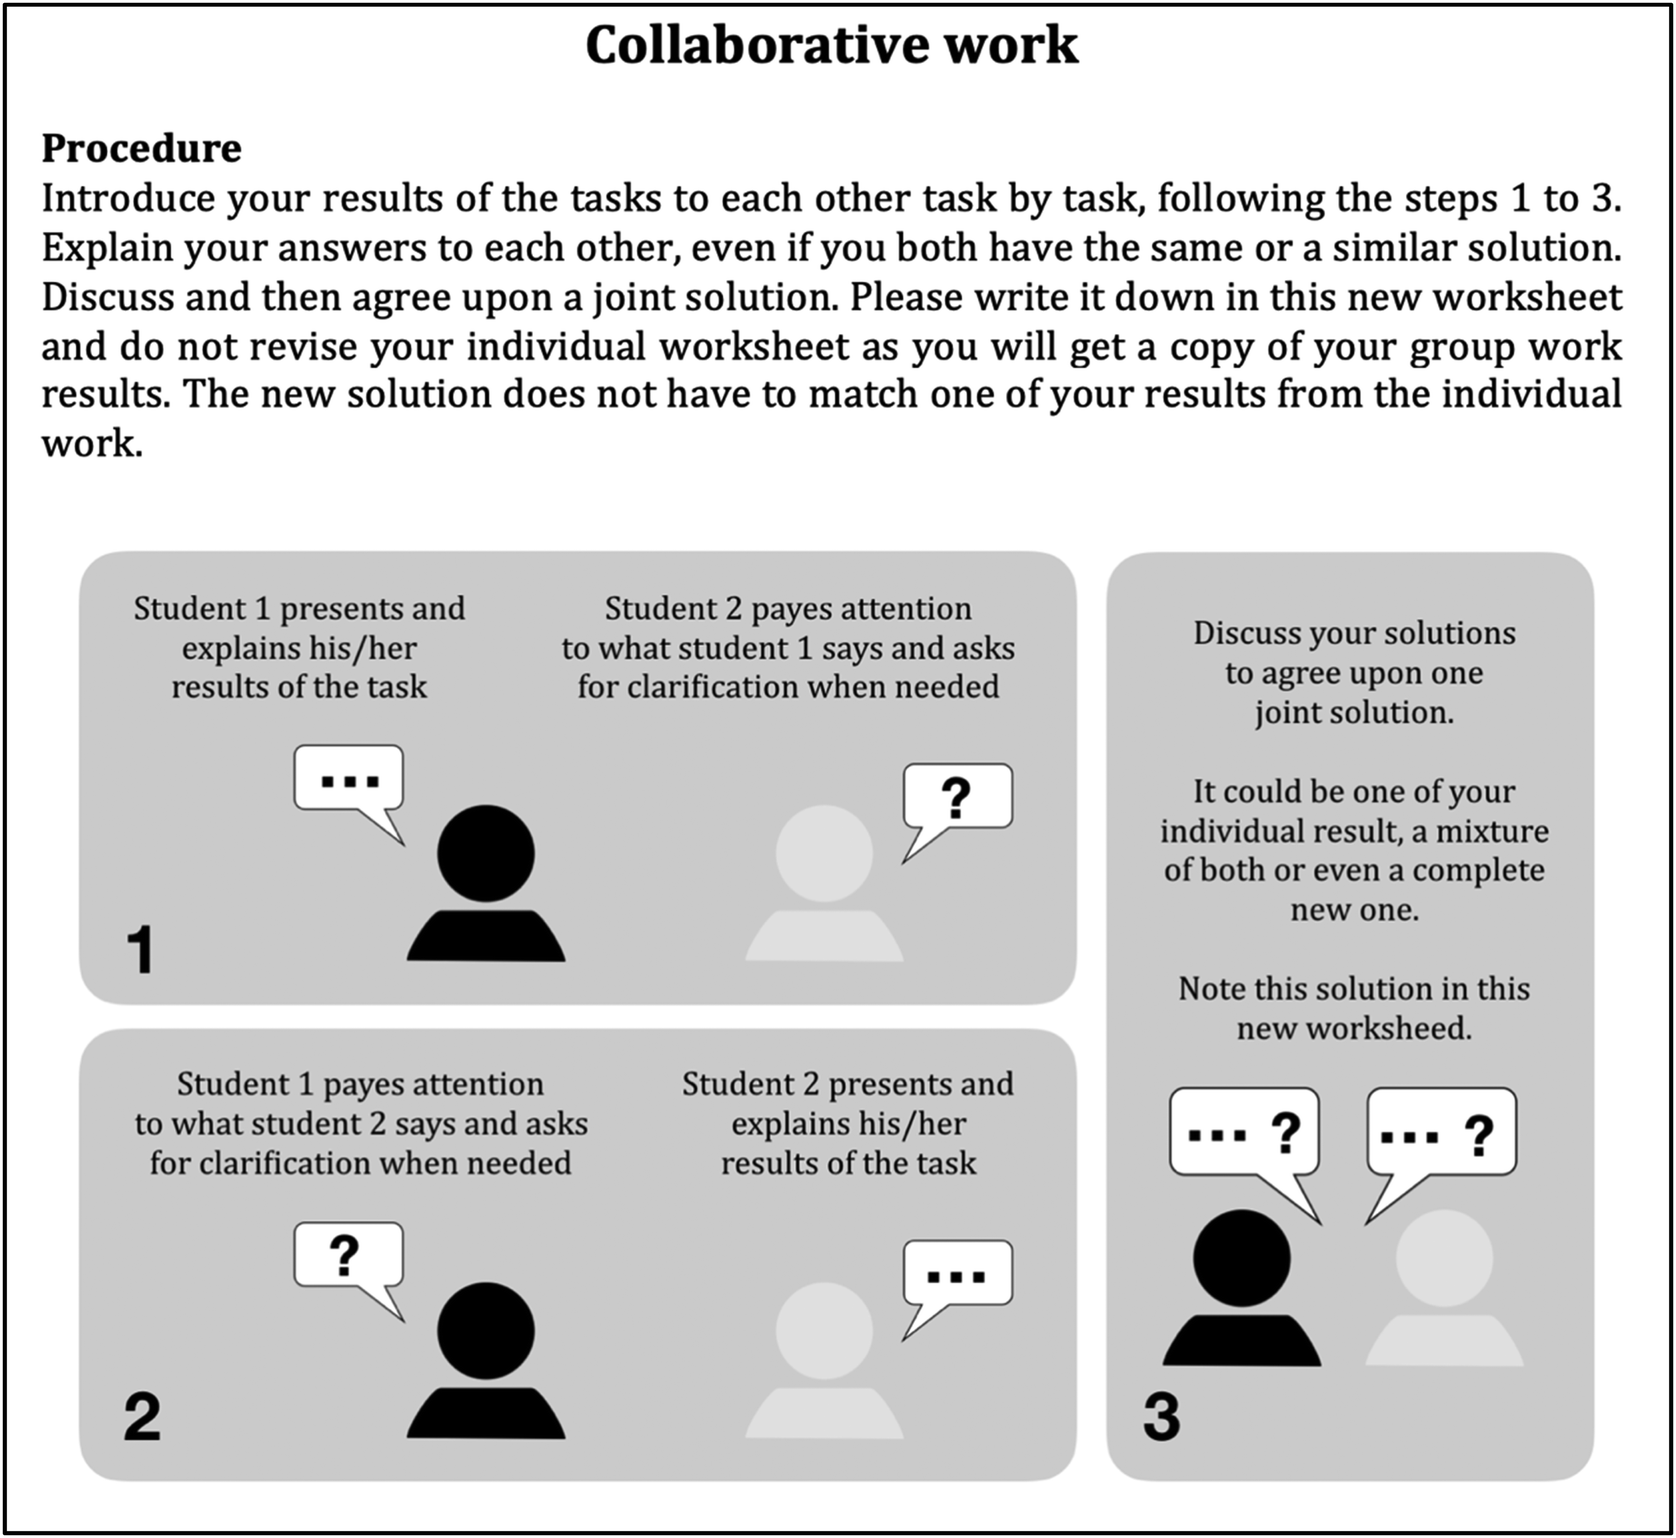 The Interplay Between Individual Reflection And Collaborative Learning Seven Essential Features For Designing Fruitful Classroom Practices That Deve Chemistry Education Research And Practice Rsc Publishing Doi 10 1039 C9rpa